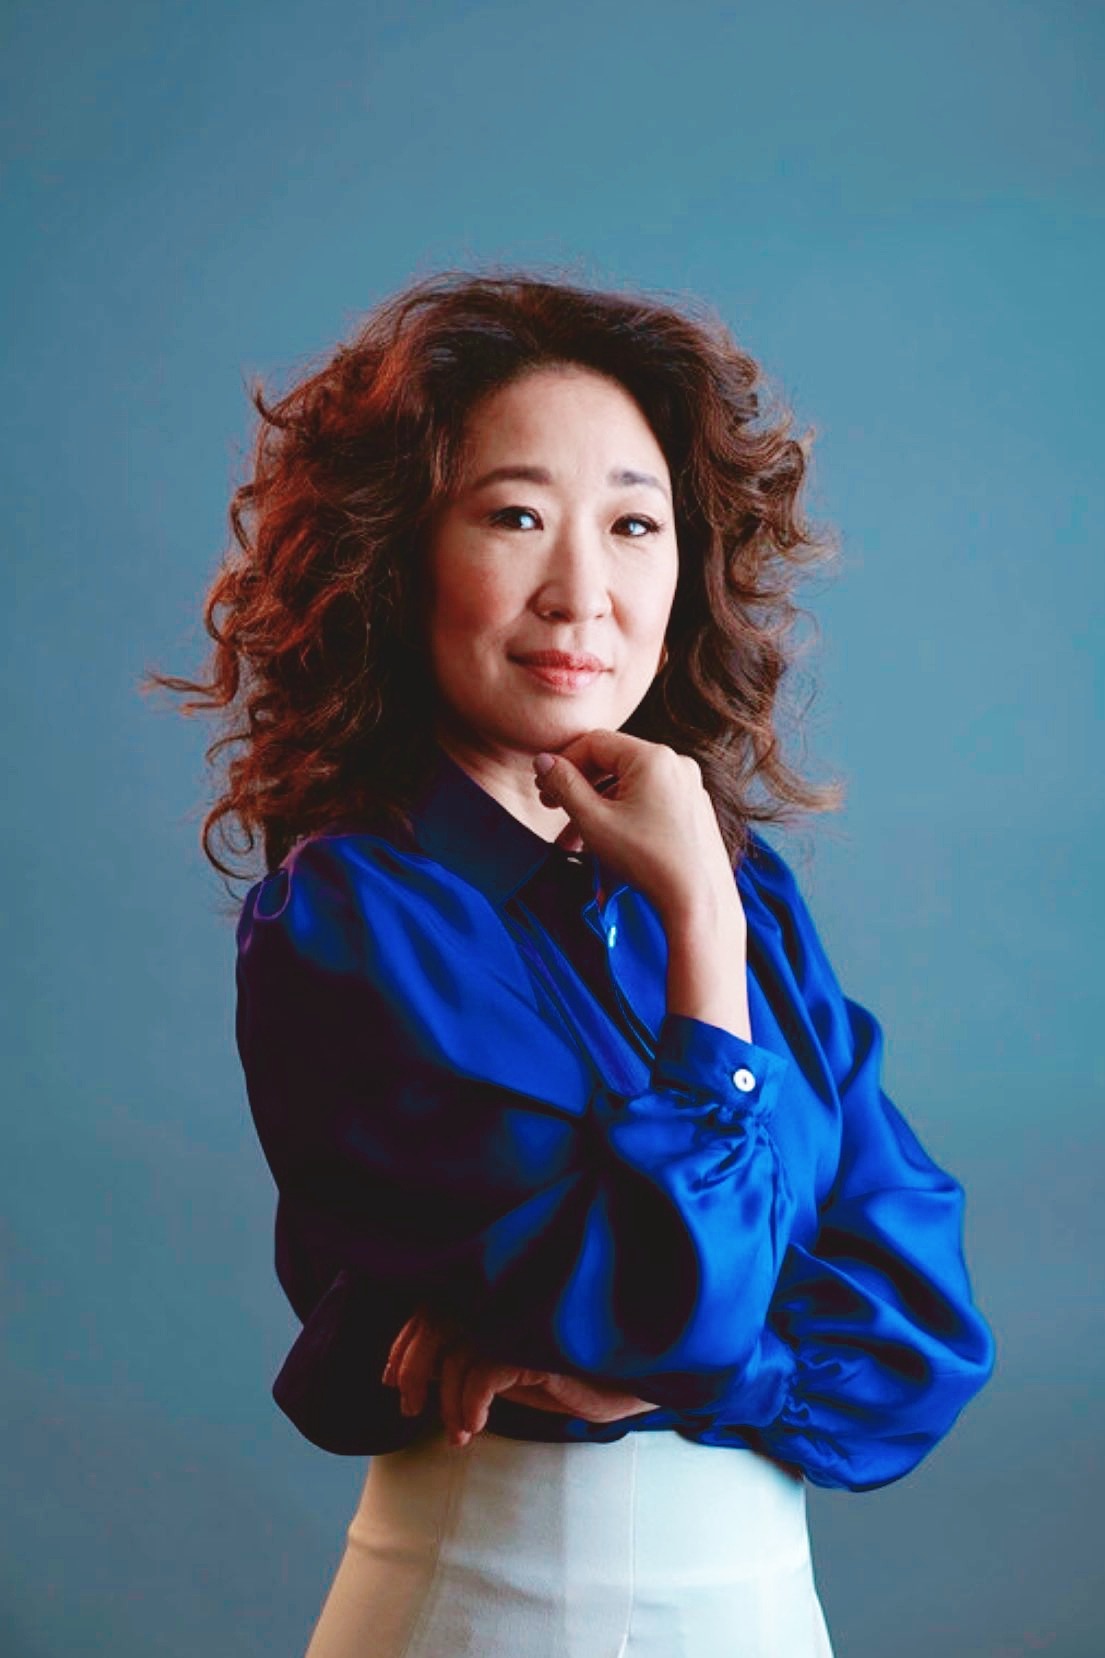 all-things-sandra-oh:Sandra Oh has greatly admired @ViolaDavis through the years: